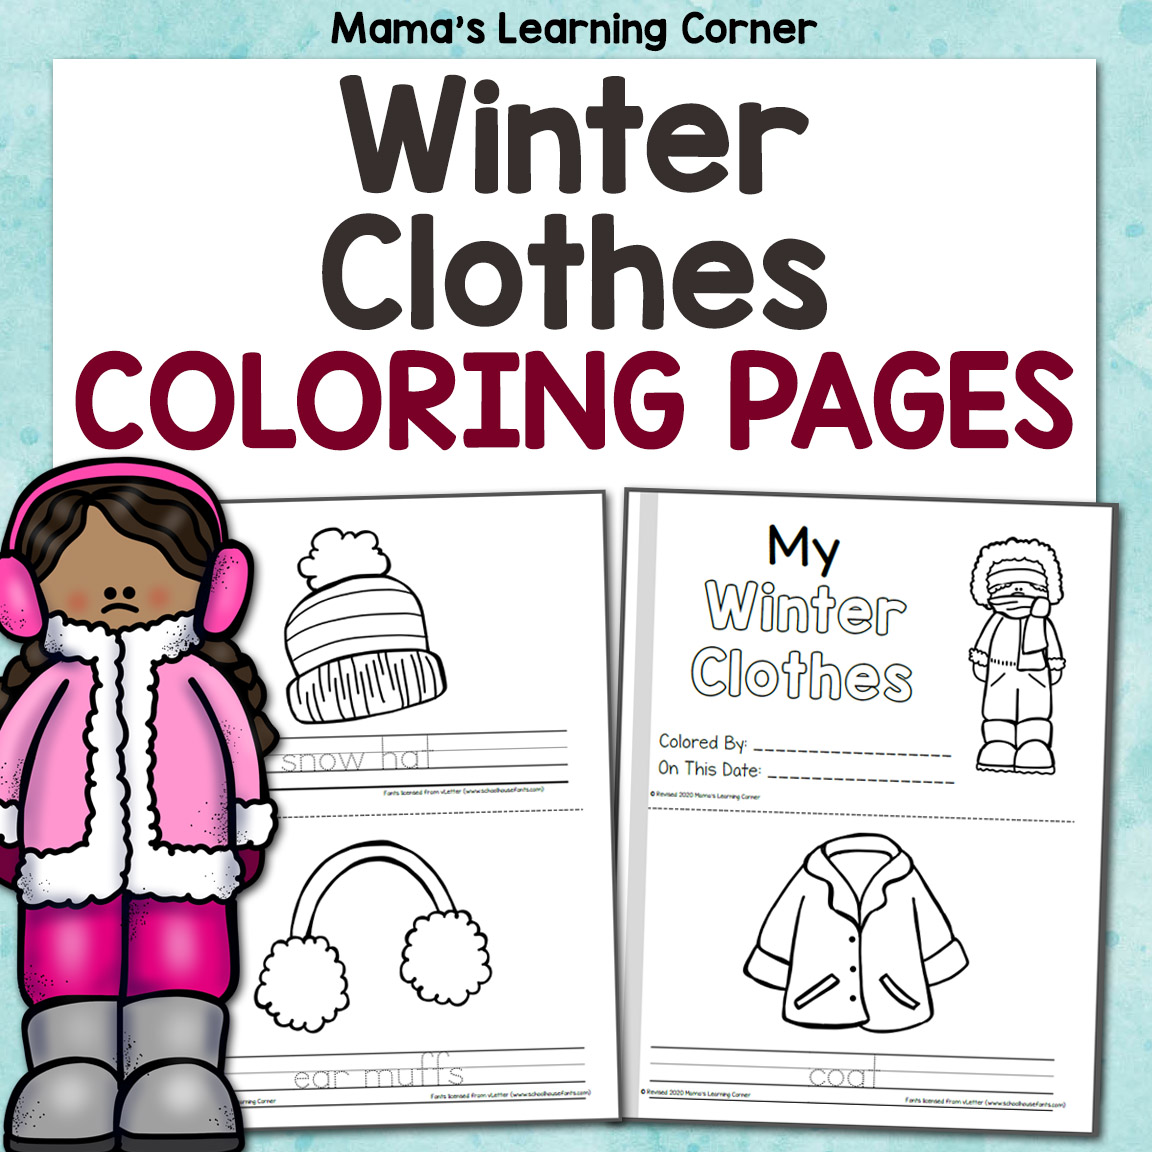 Cozy Coats for Kids® Children's Coloring Sheet - Inspection Gallery -  InterNACHI®